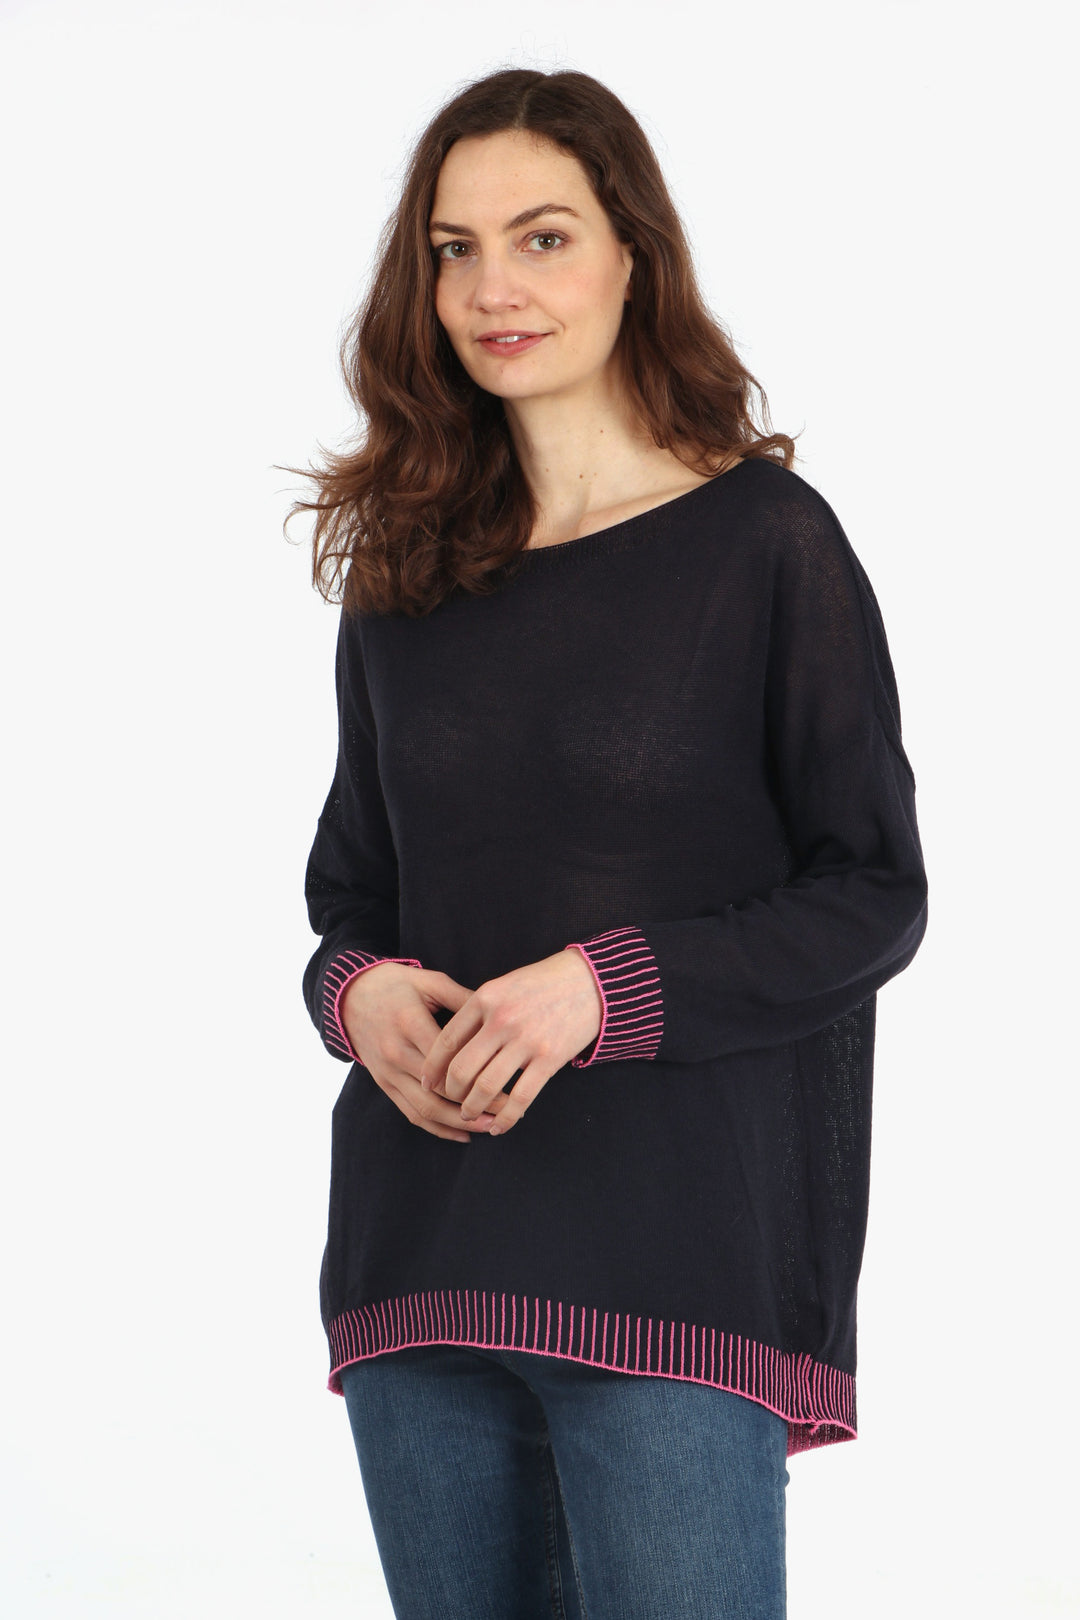 model wearing a navy blue long sleeved jumper with a pink contrast stitch trim around the cuffs and edge of the jumper